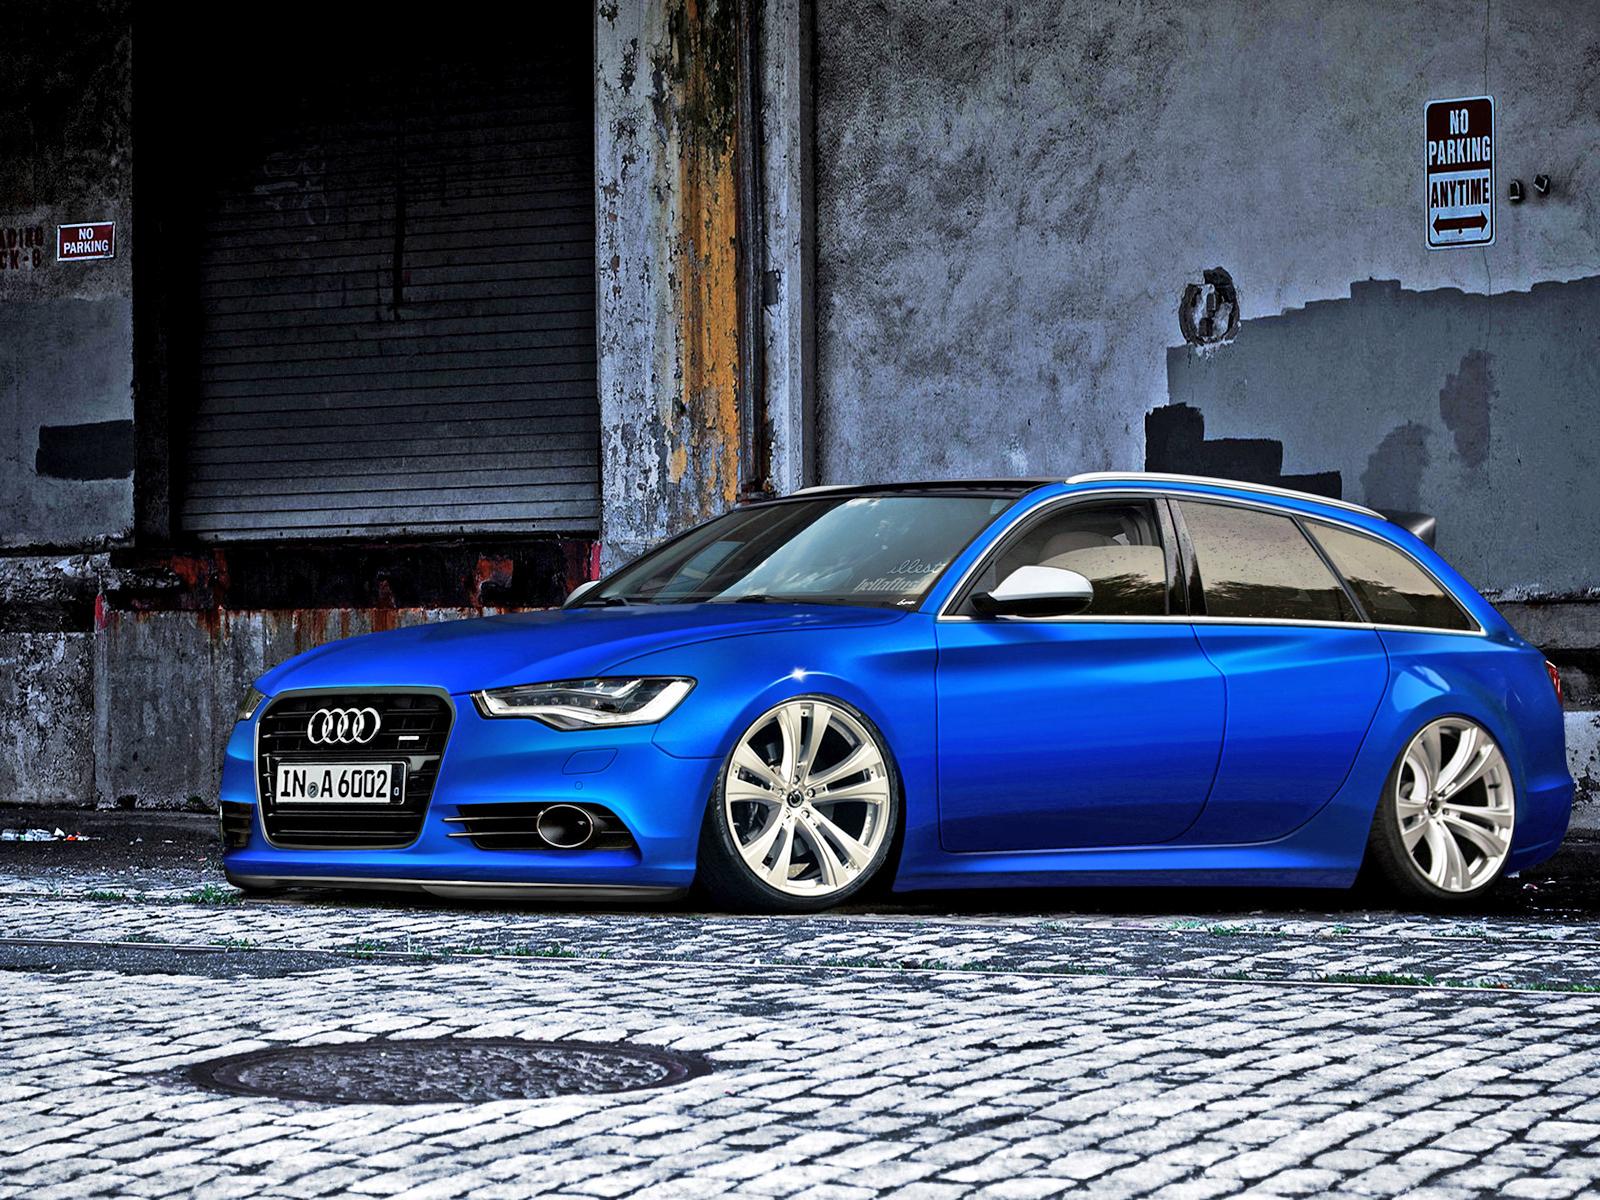 Audi A6 Wallpaper HD Full HD Pictures